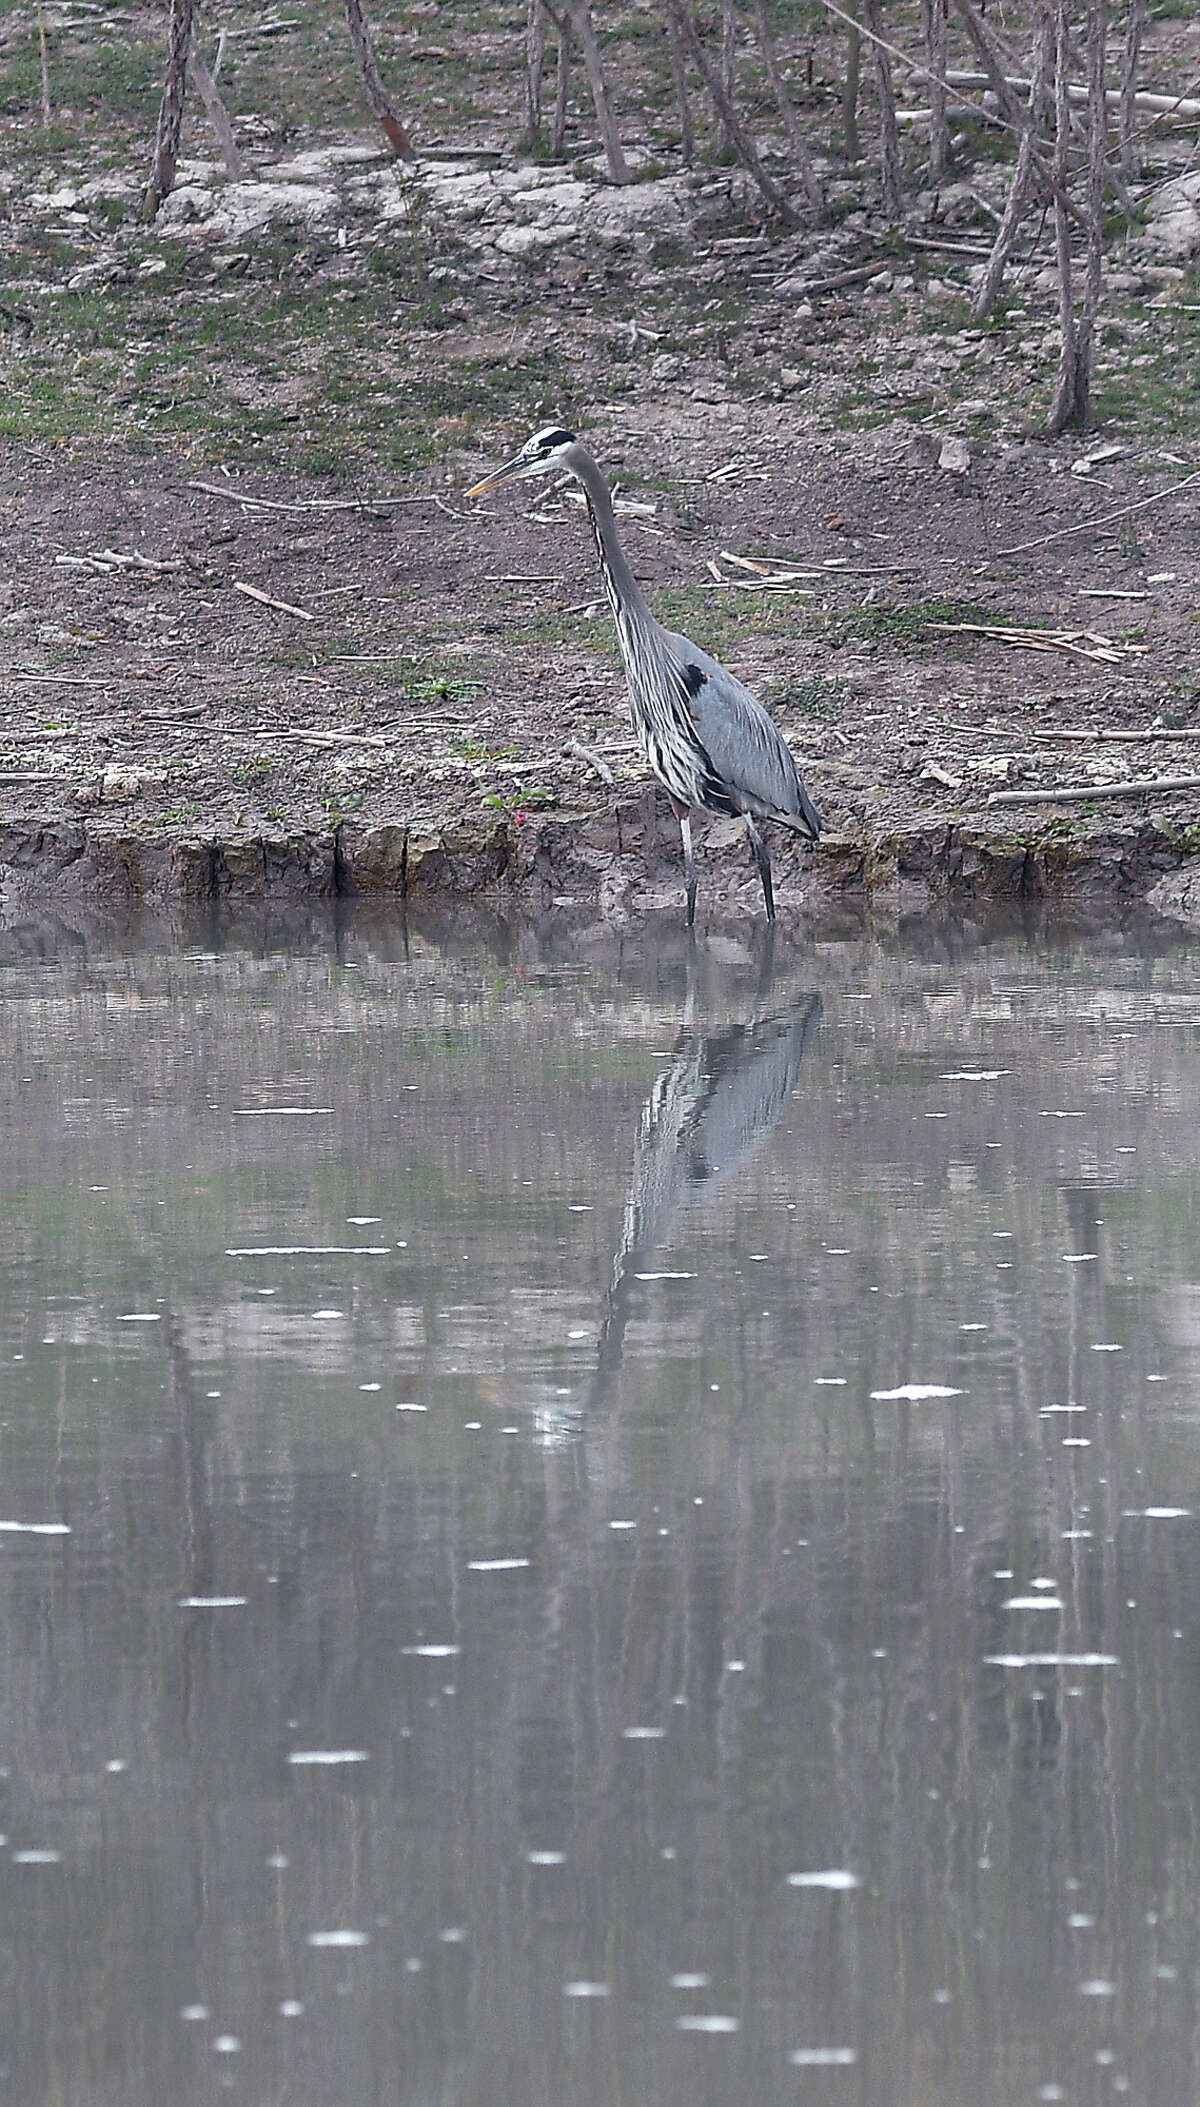 Zapata County officials are concerned about the effect a border wall will have on the San Ygnacio Bird Sanctuary. Visitors to the site can see a variety of interesting sites and sounds such as this grey heron on the Mexican side of the river.